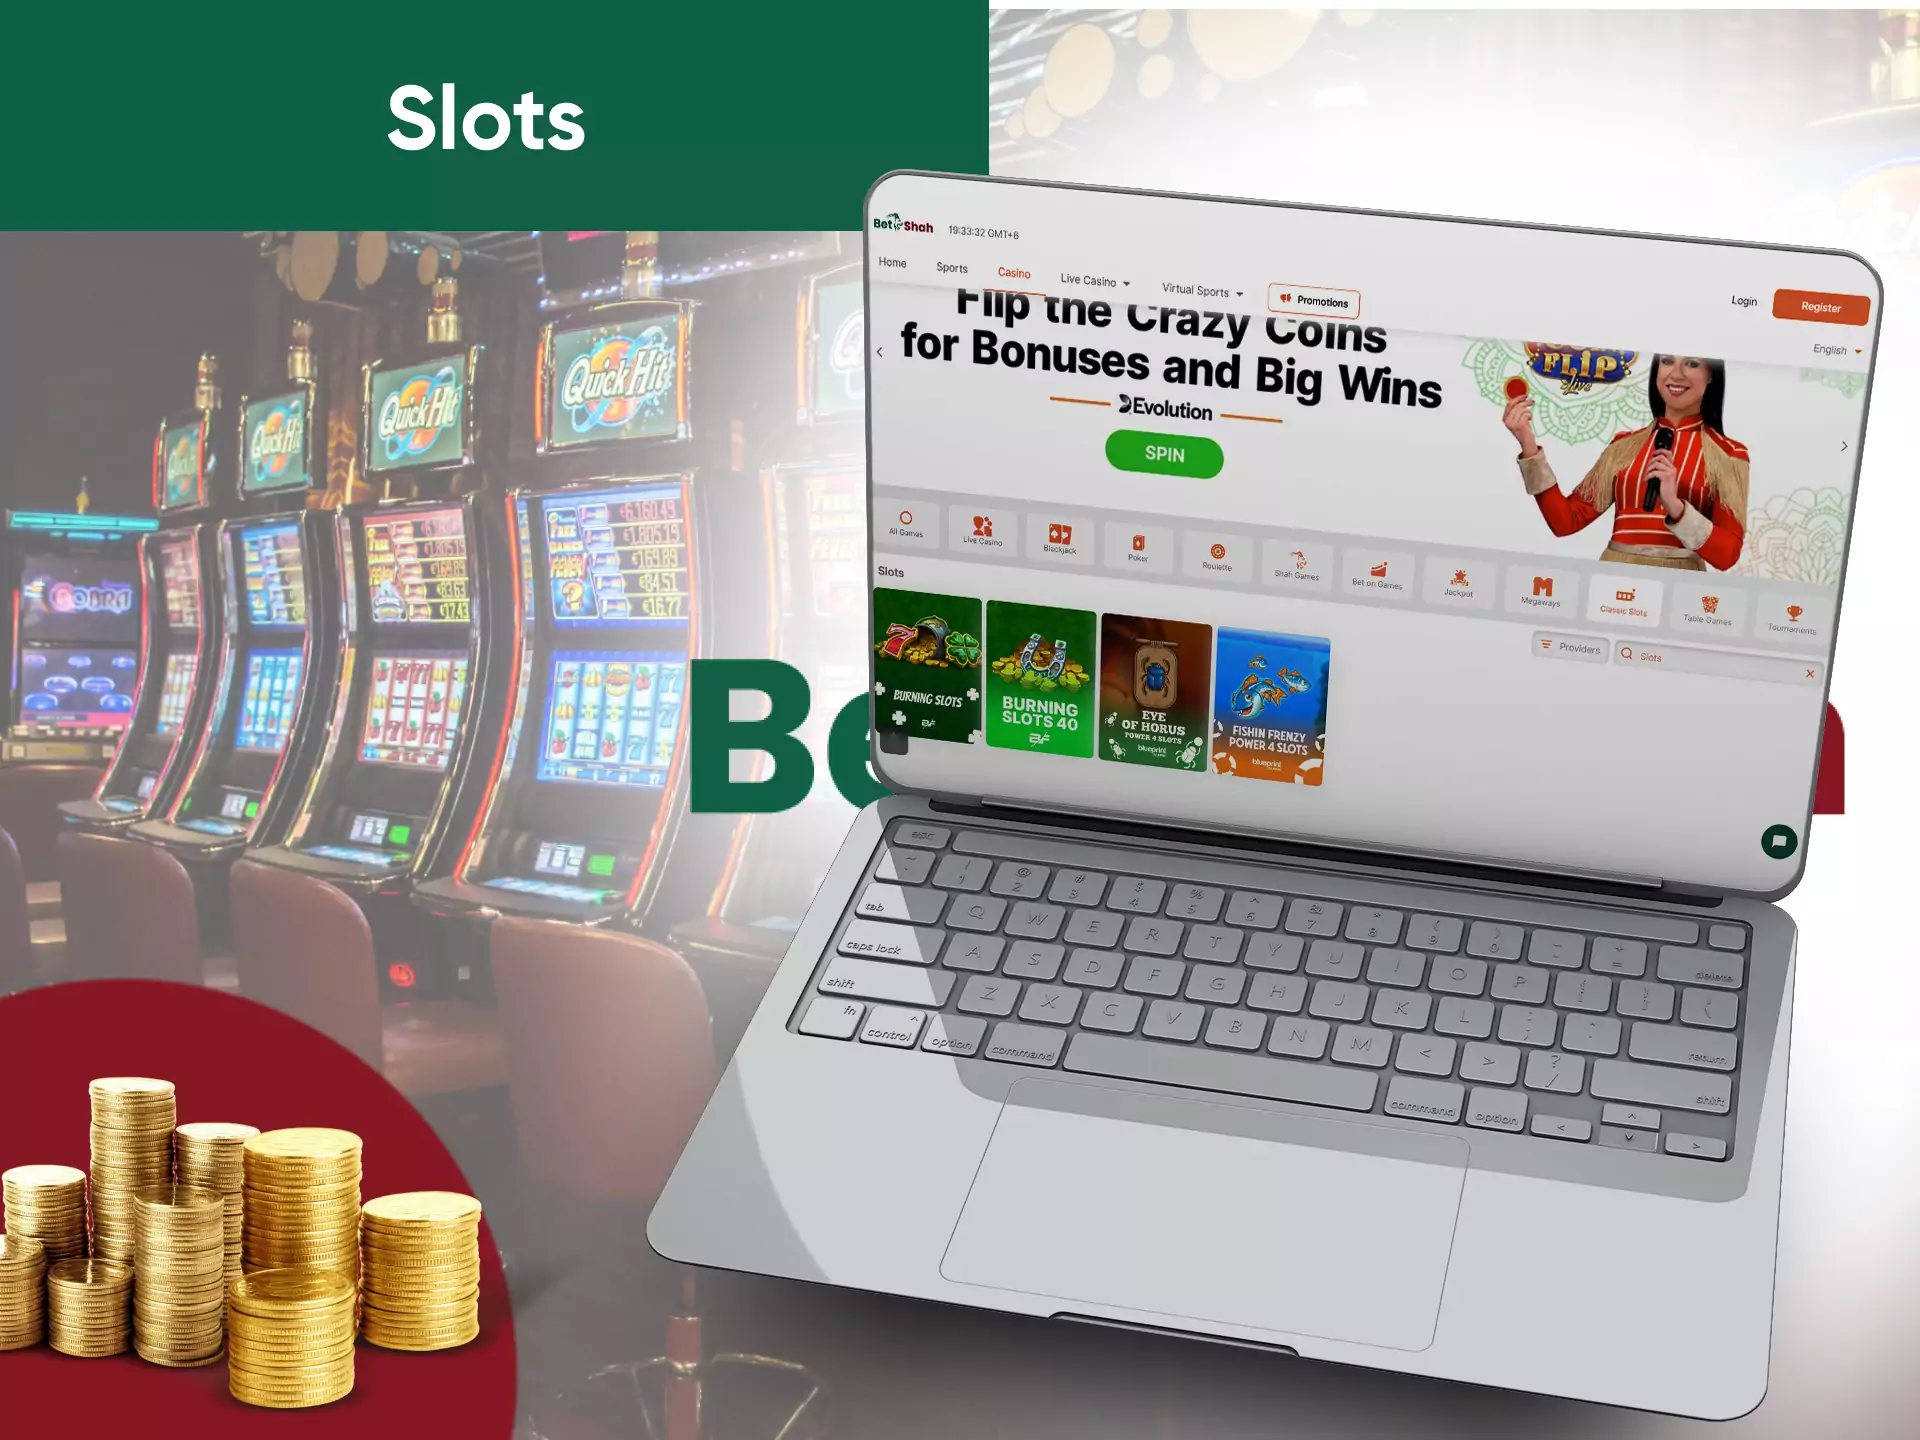 On Betshah, users have a lot of colourful online slots available for playing.